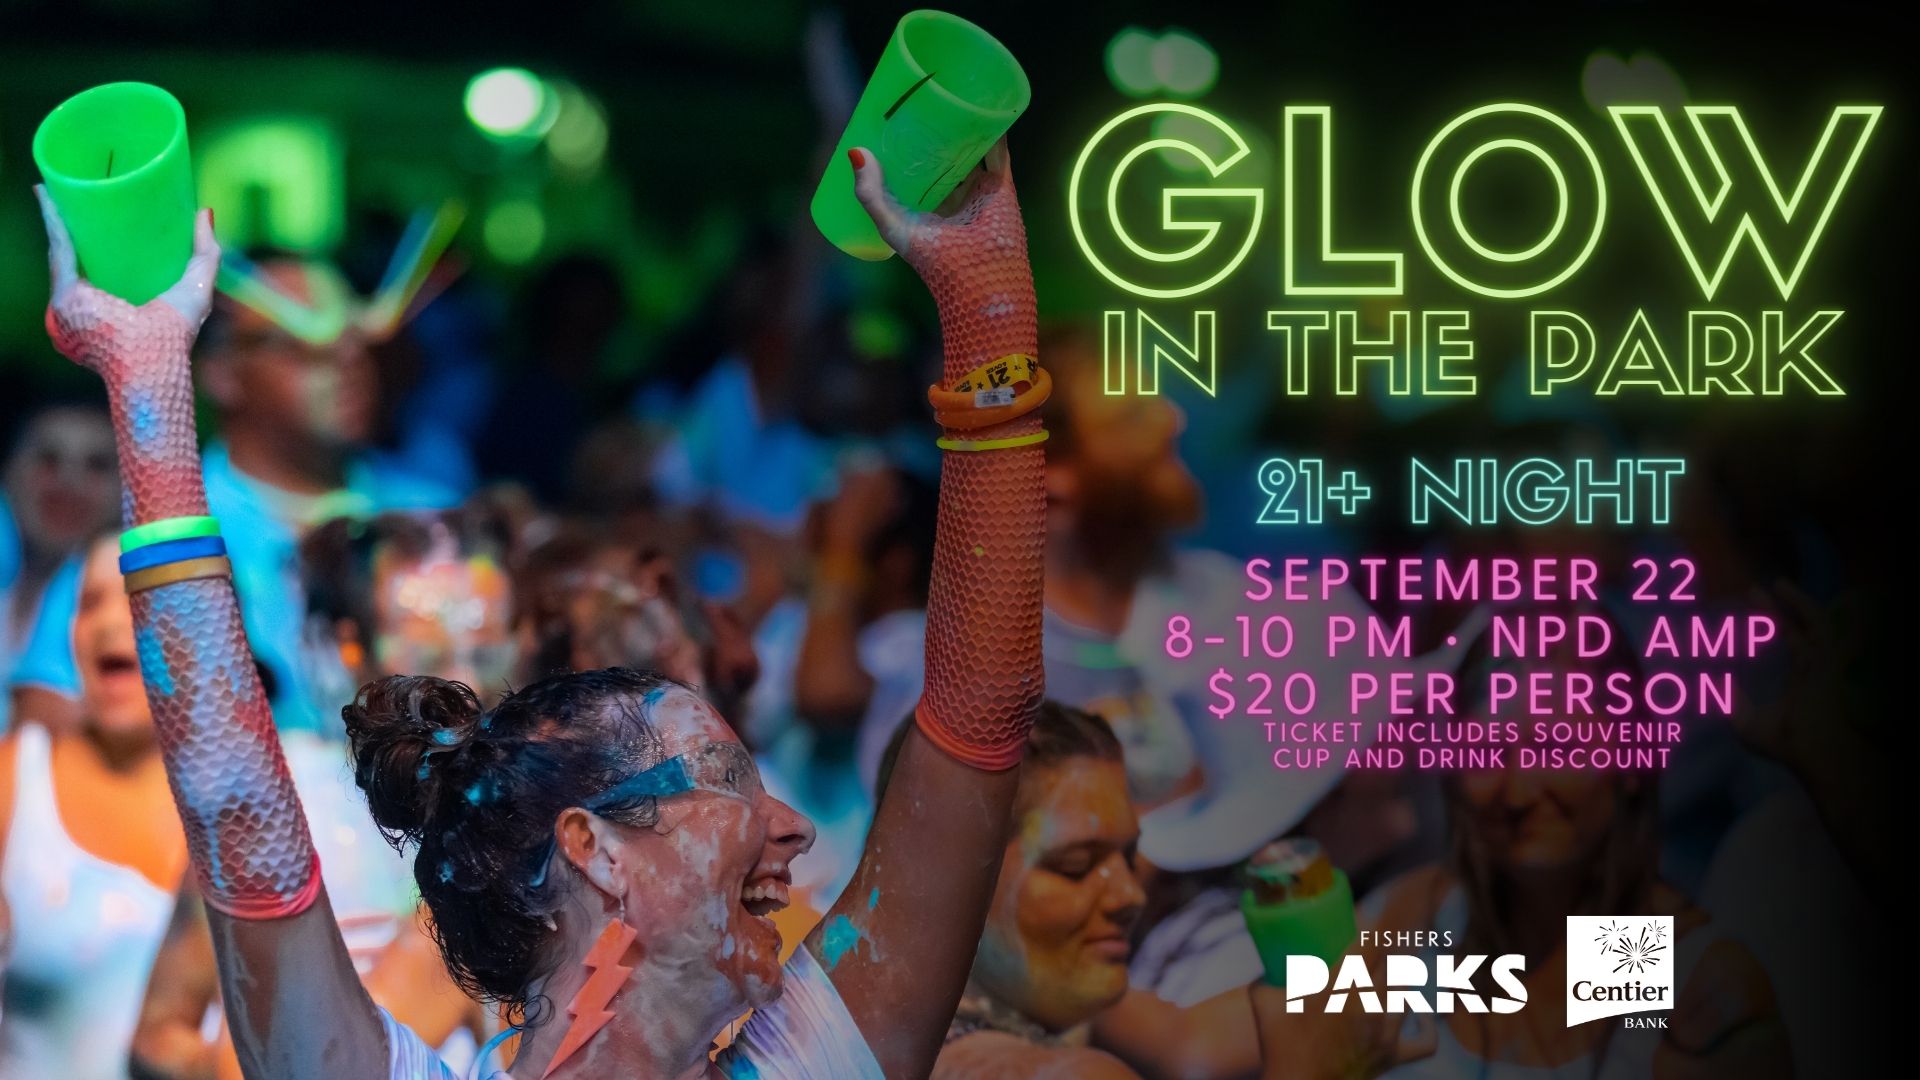 Glow in the Park 21+ Night September 22 8-10pm NPD Amp $20 per person